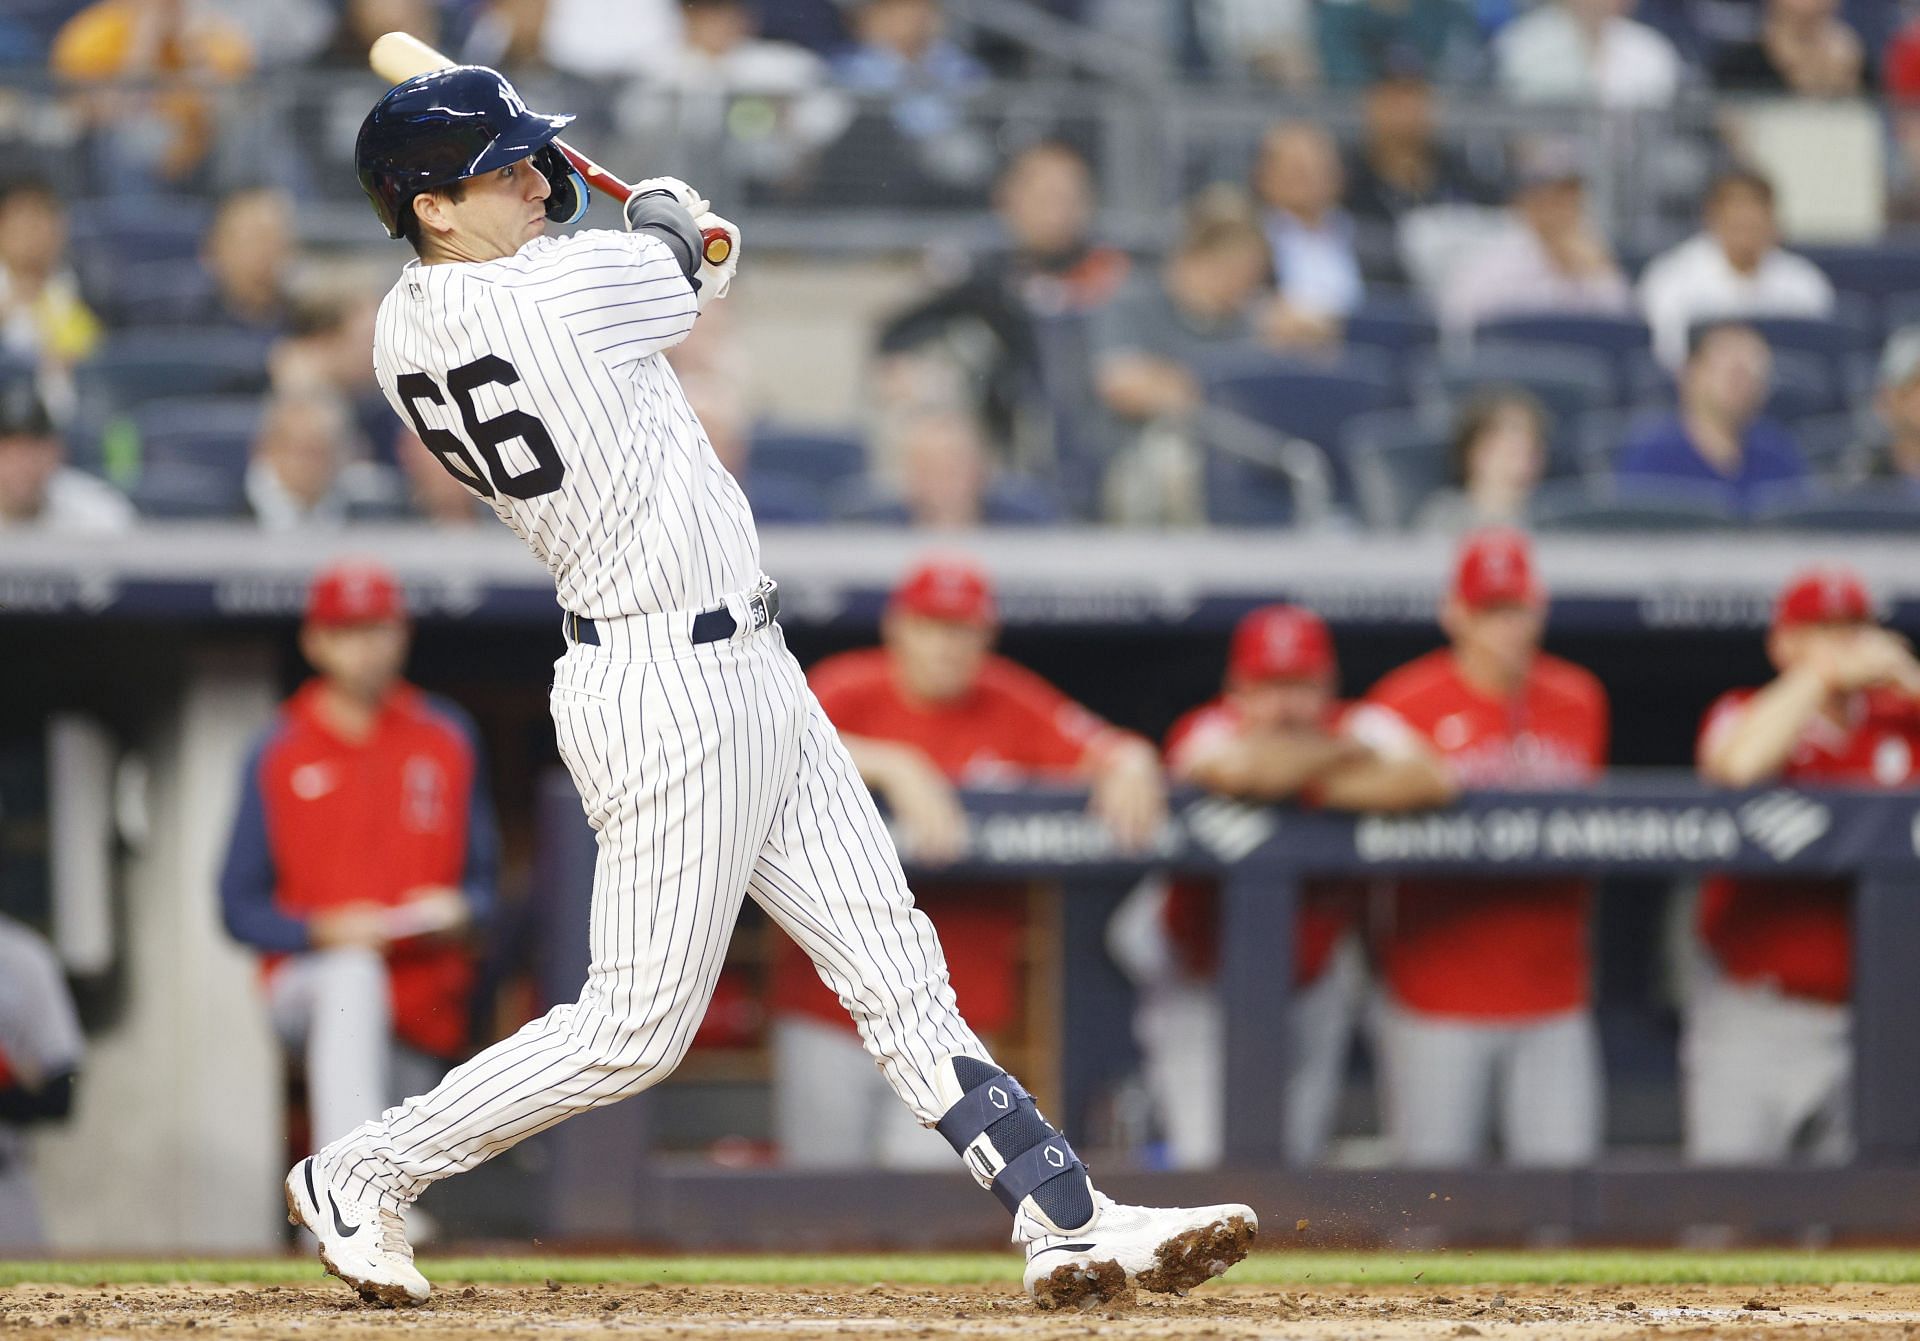 Kyle Higashioka responds after fan vows to tattoo Yankees catcher